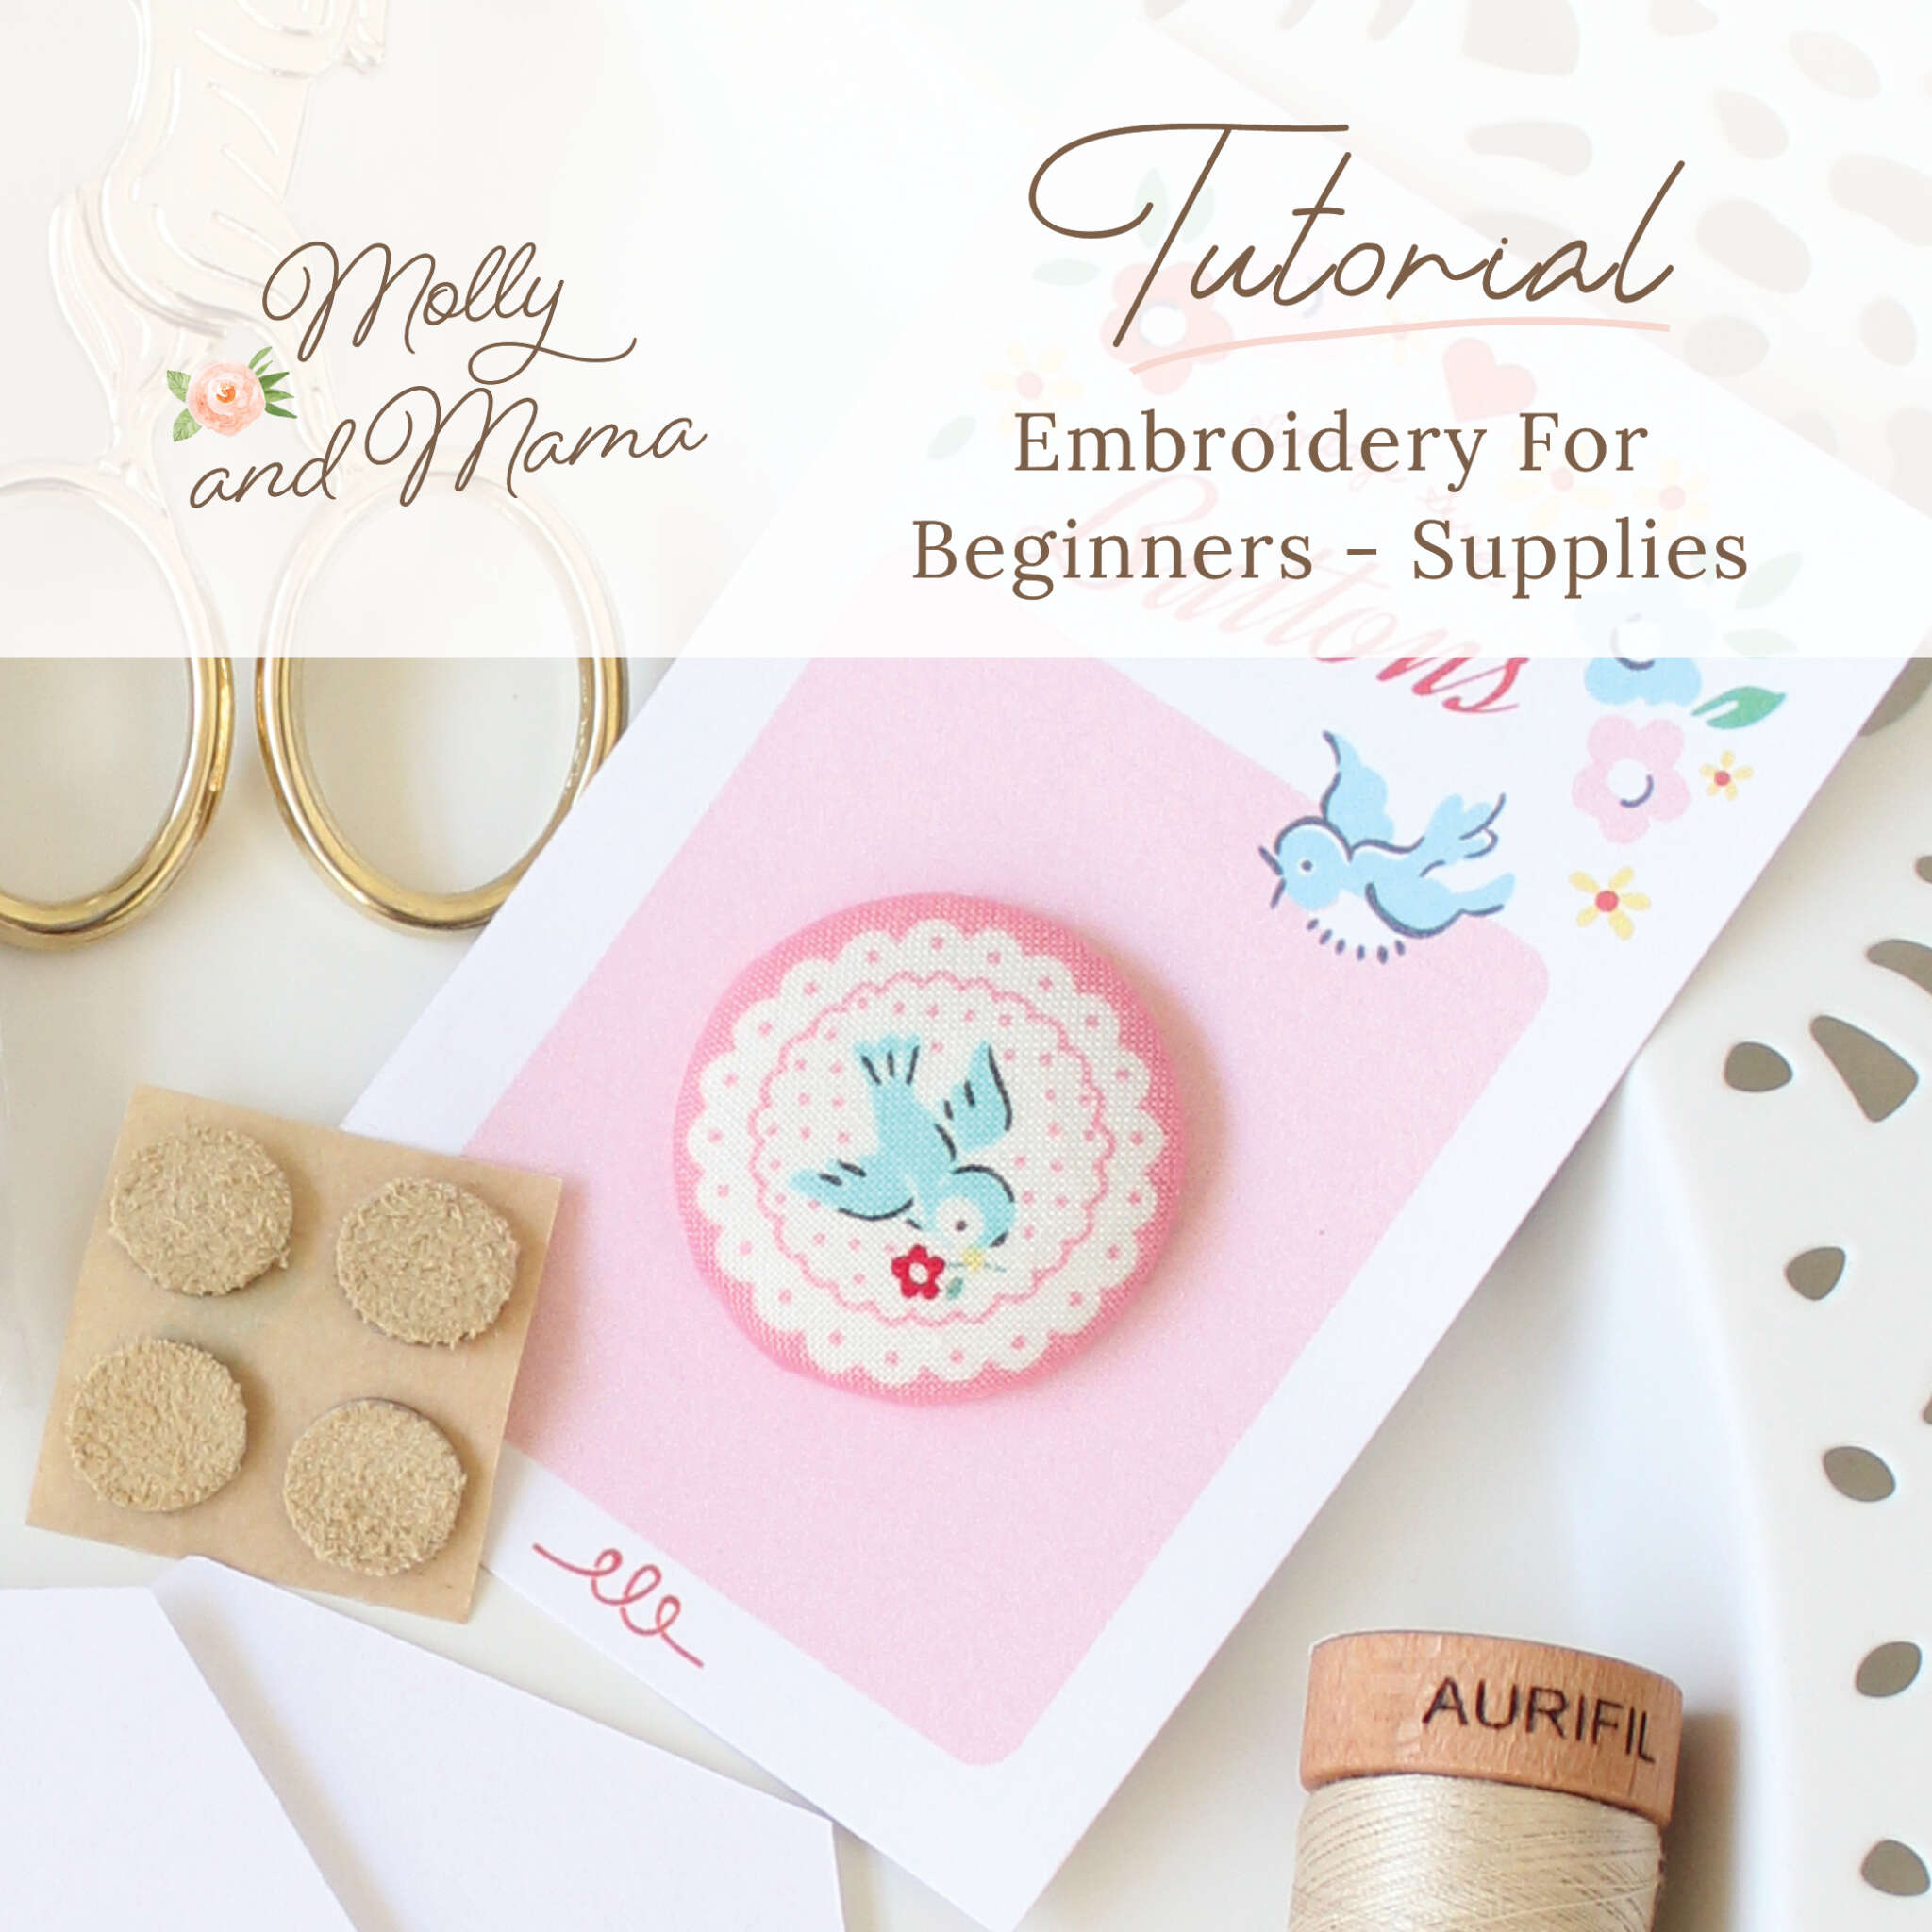 Embroidery For Beginners – What Supplies Will You Need?